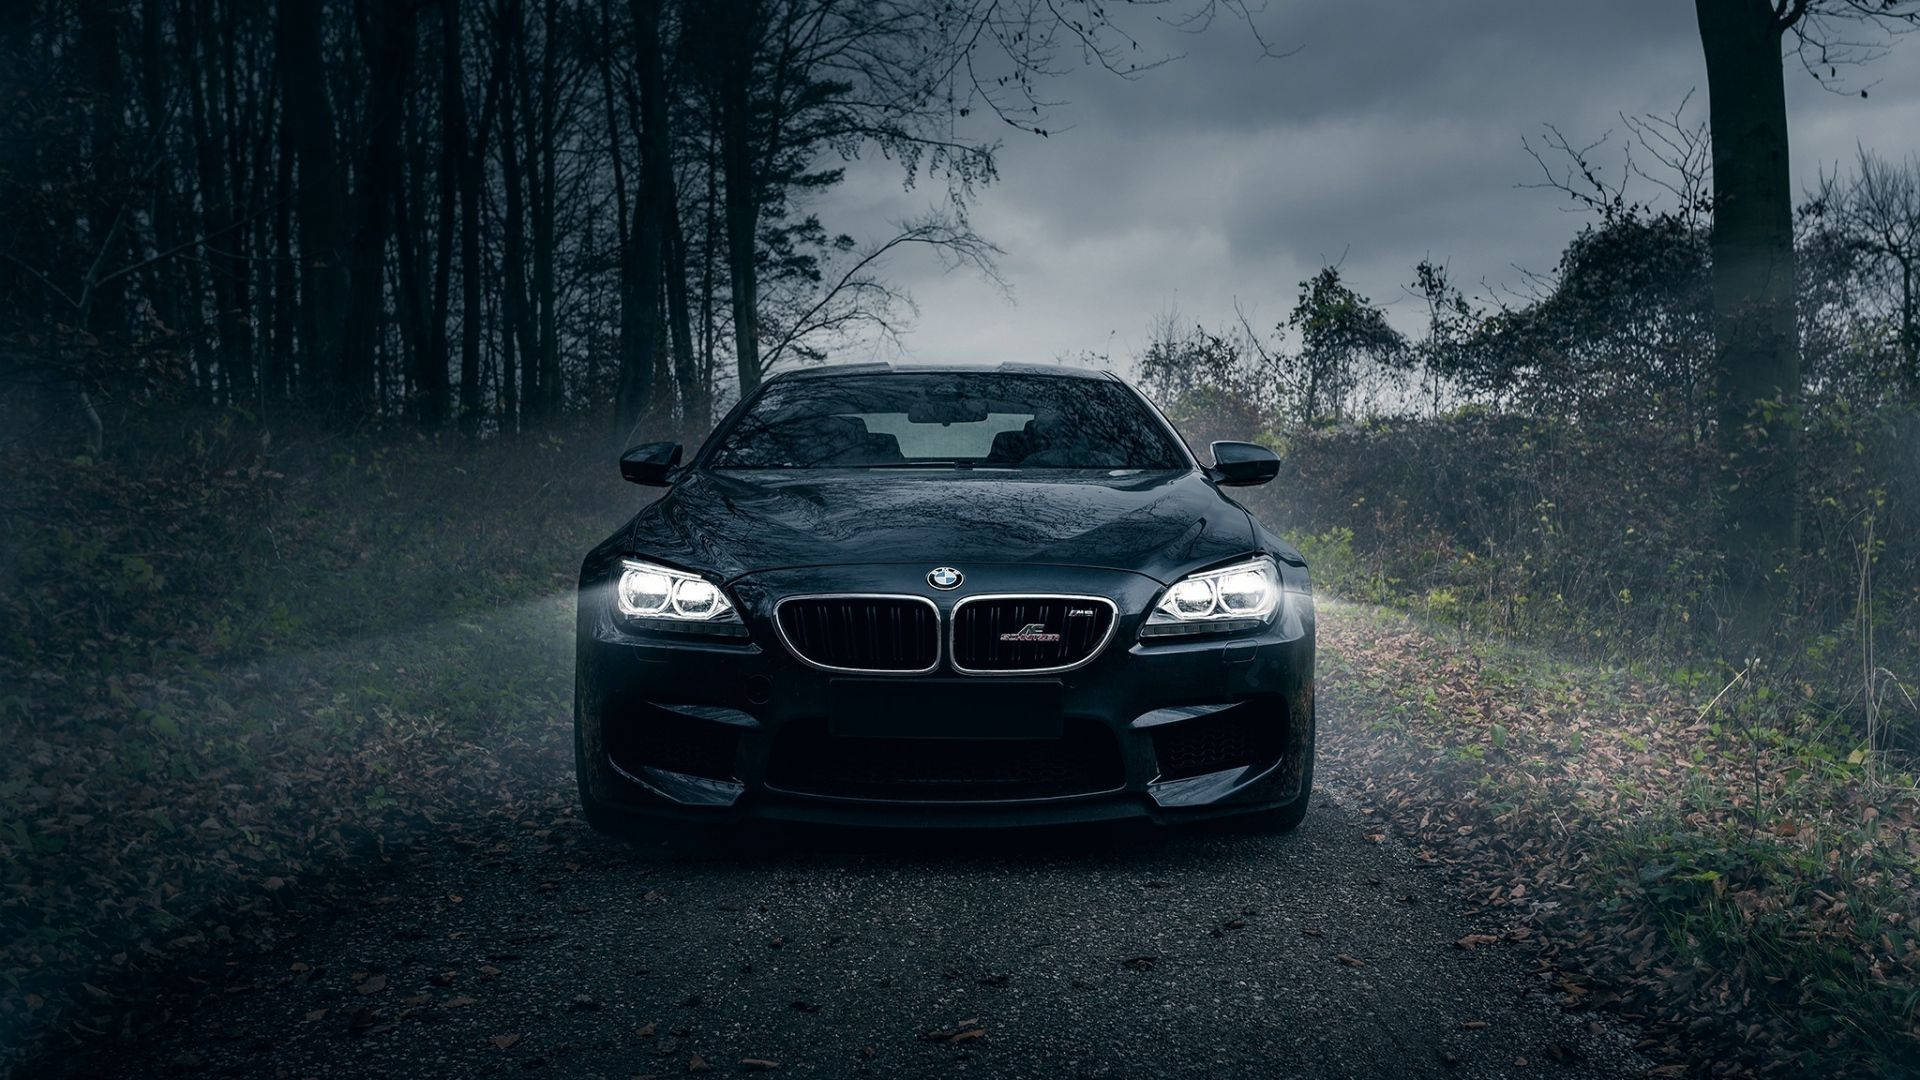 Feel the power of speed with the BMW M6 Wallpaper